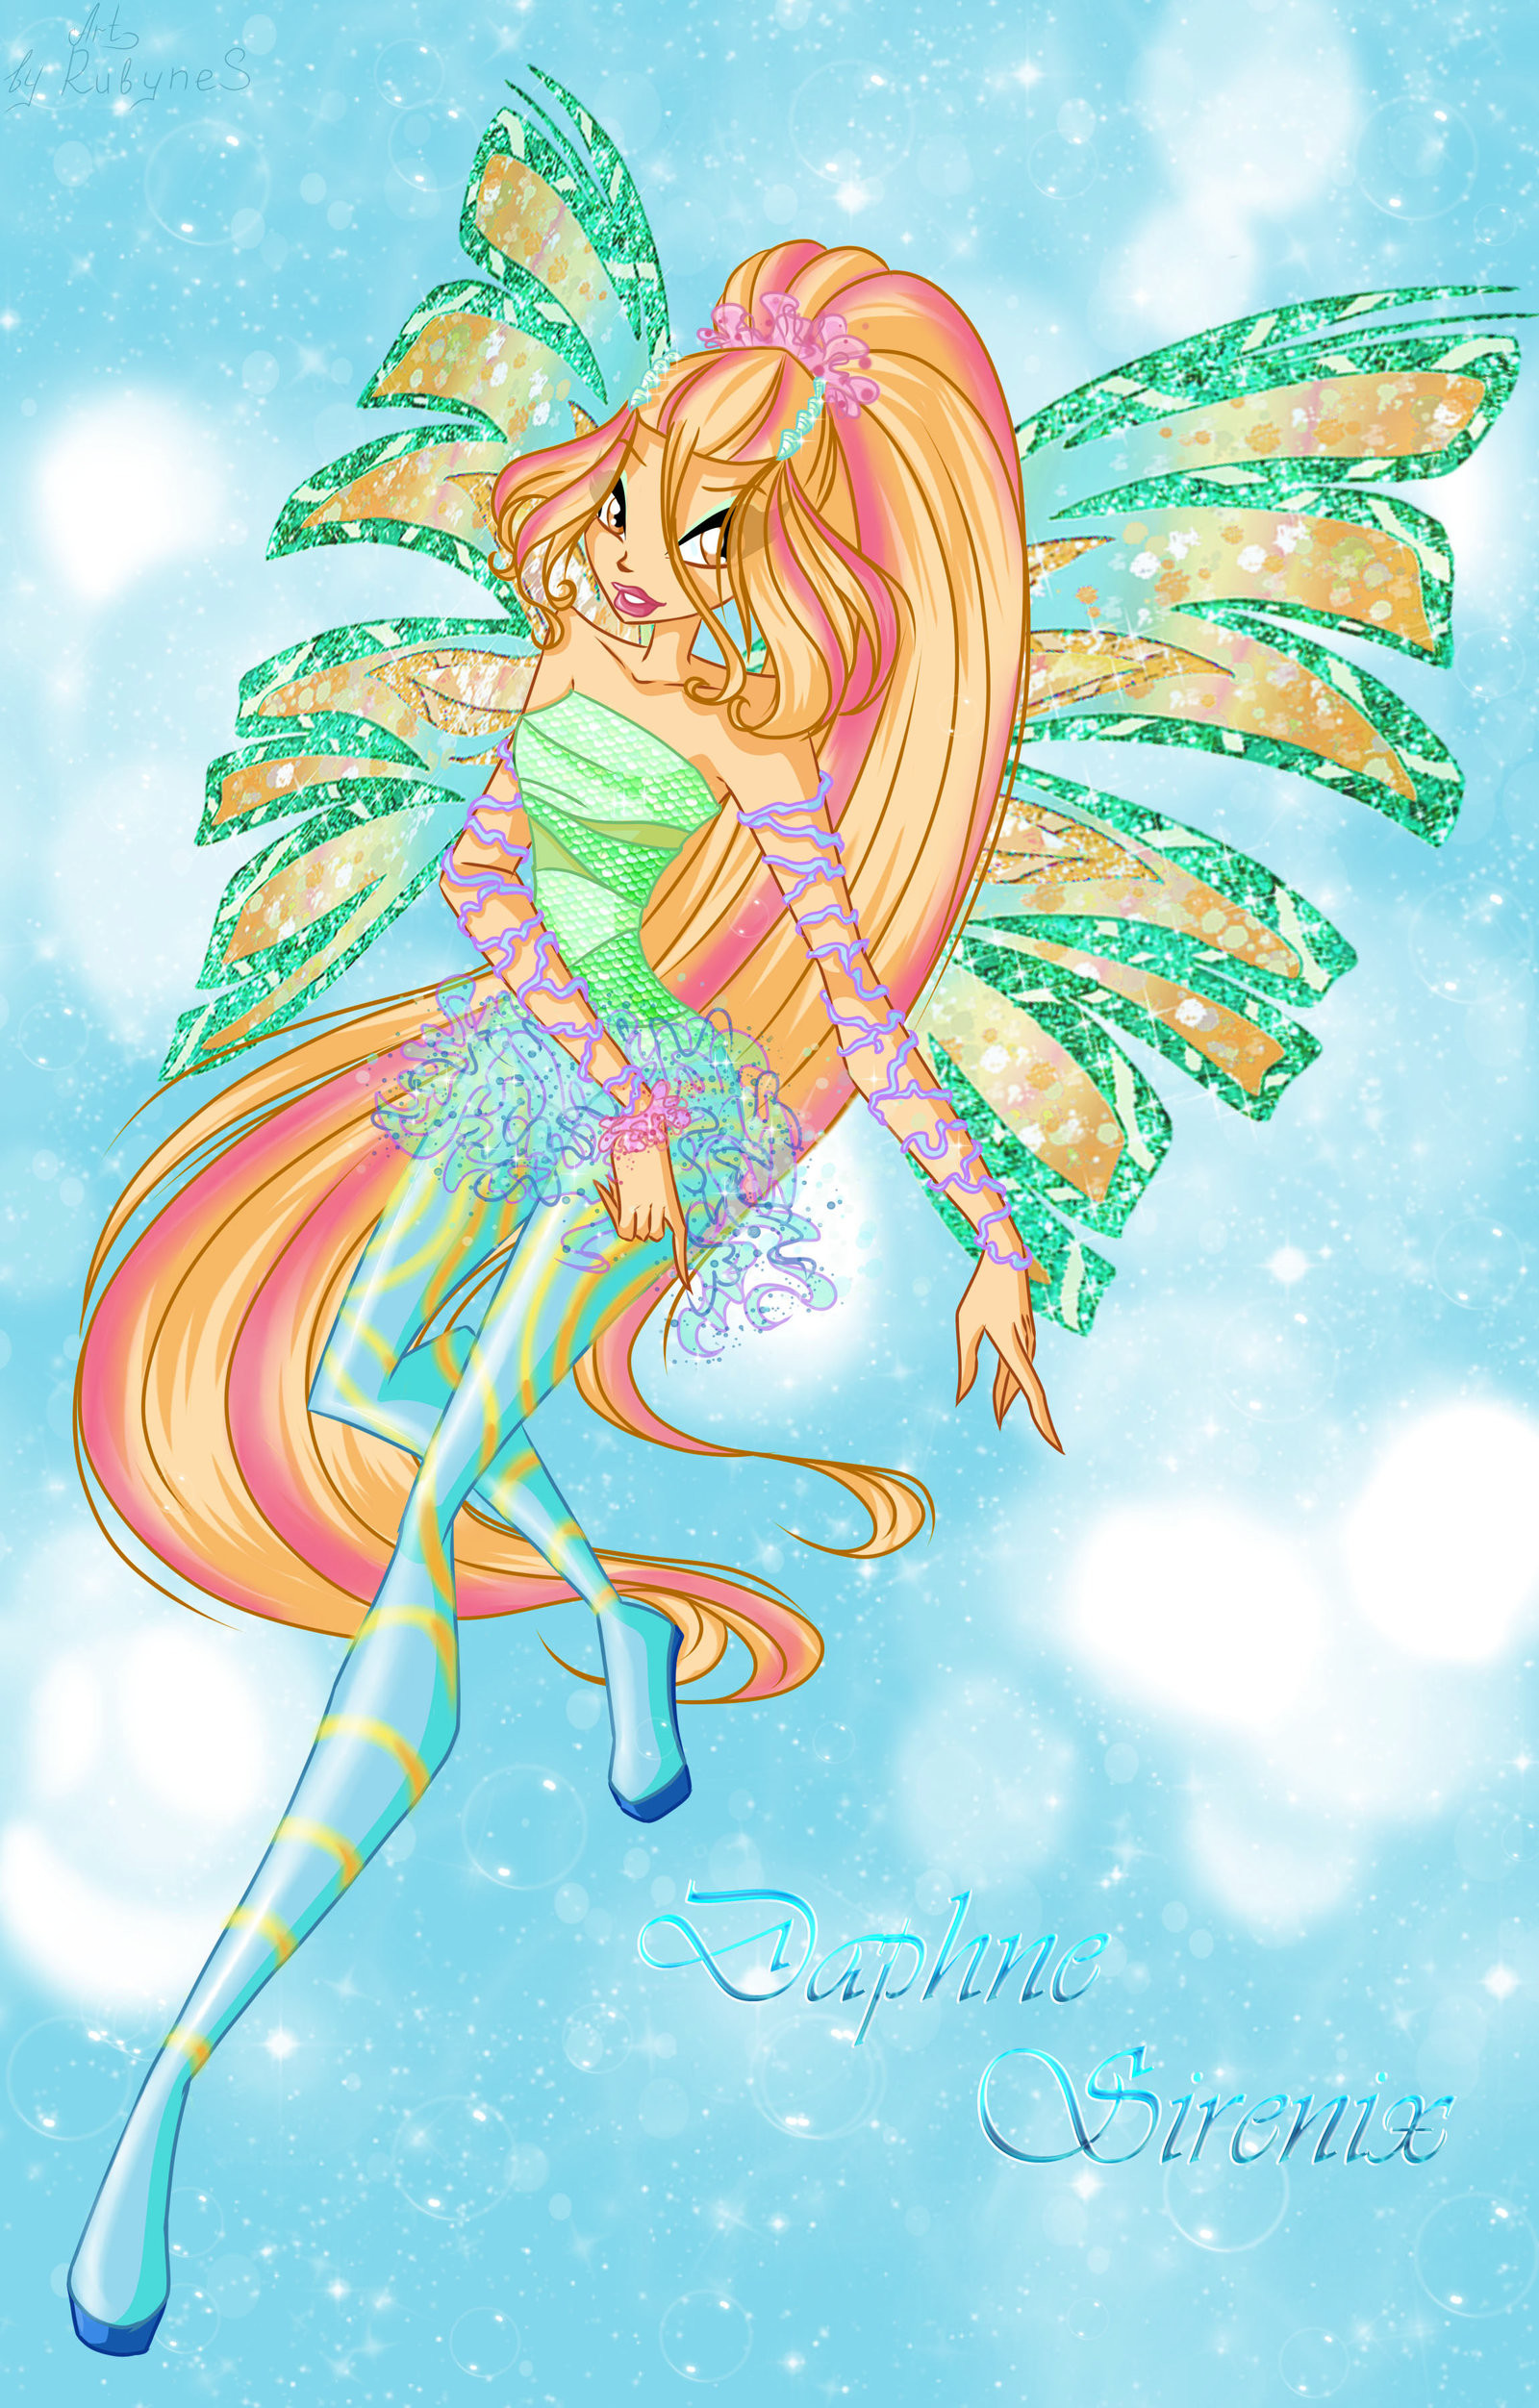 1600x2504 Winx Club Club images Daphne's Sirenix HD wallpaper and background photos